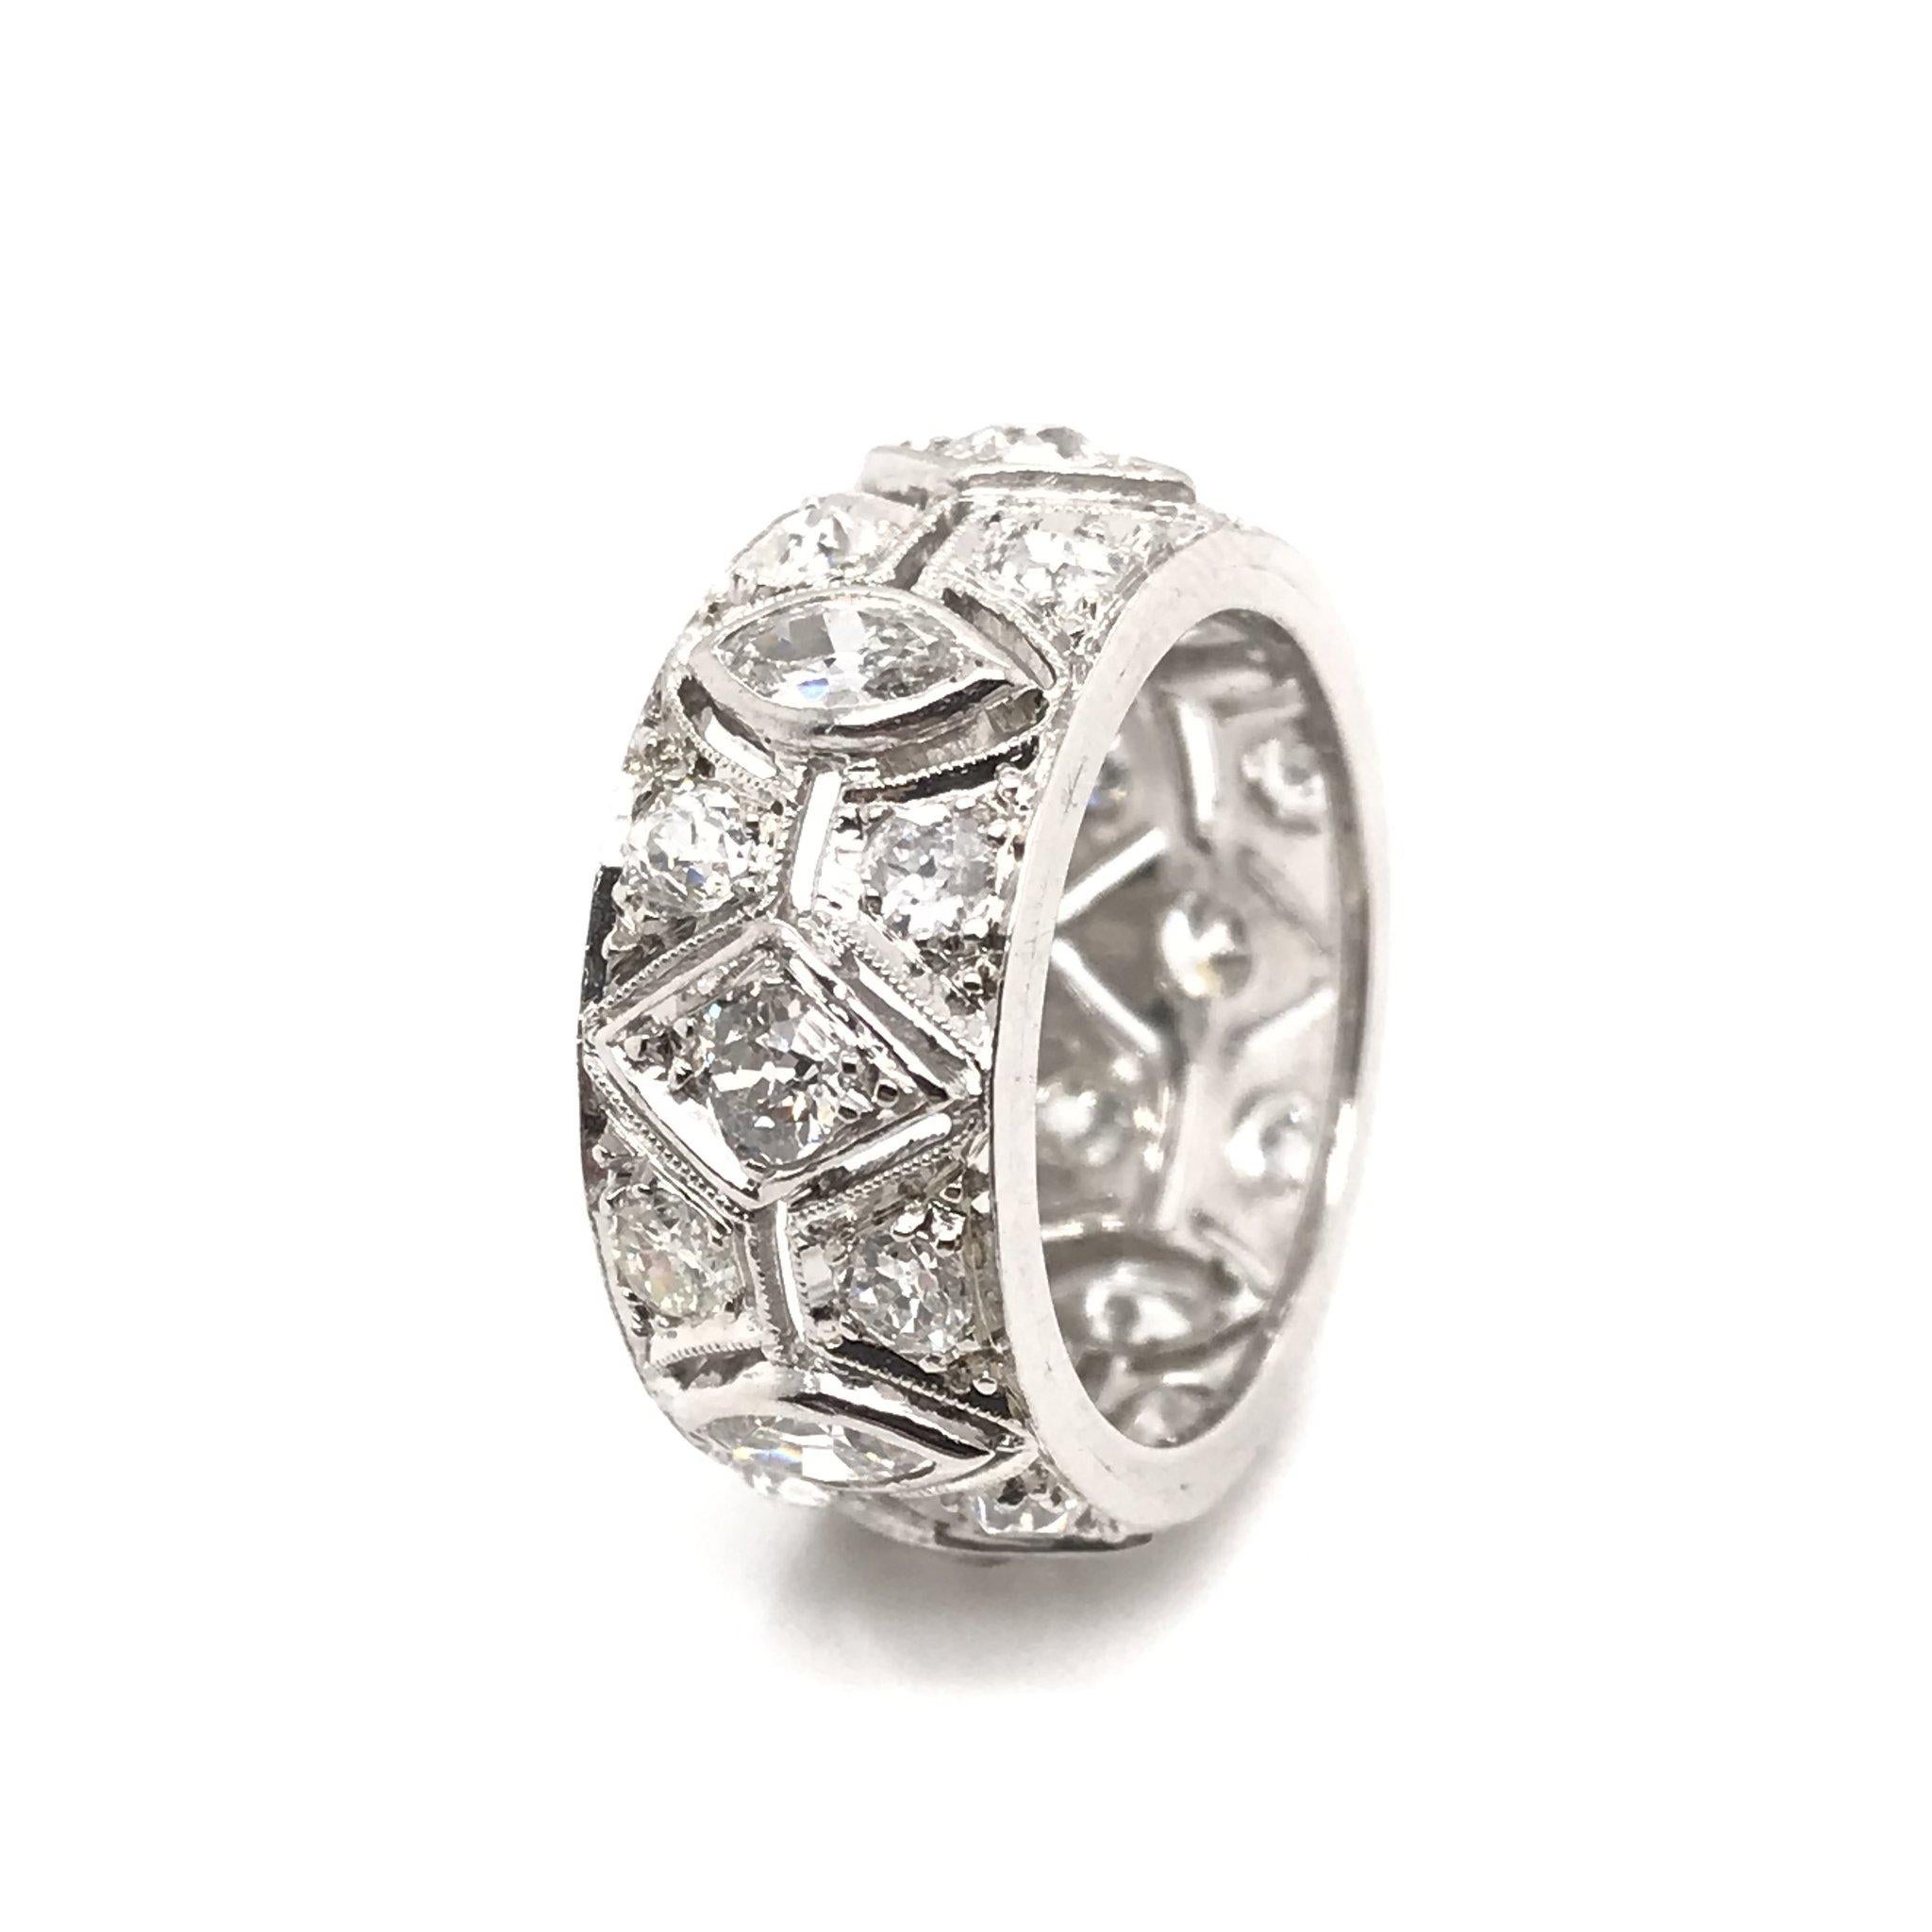 This decadent antique piece was handcrafted sometime during the Art Deco design period ( 1920-1940 ). The platinum setting features 20 sparkling European cut diamonds as well as four beautiful antique marquee cut diamonds. The total combined diamond